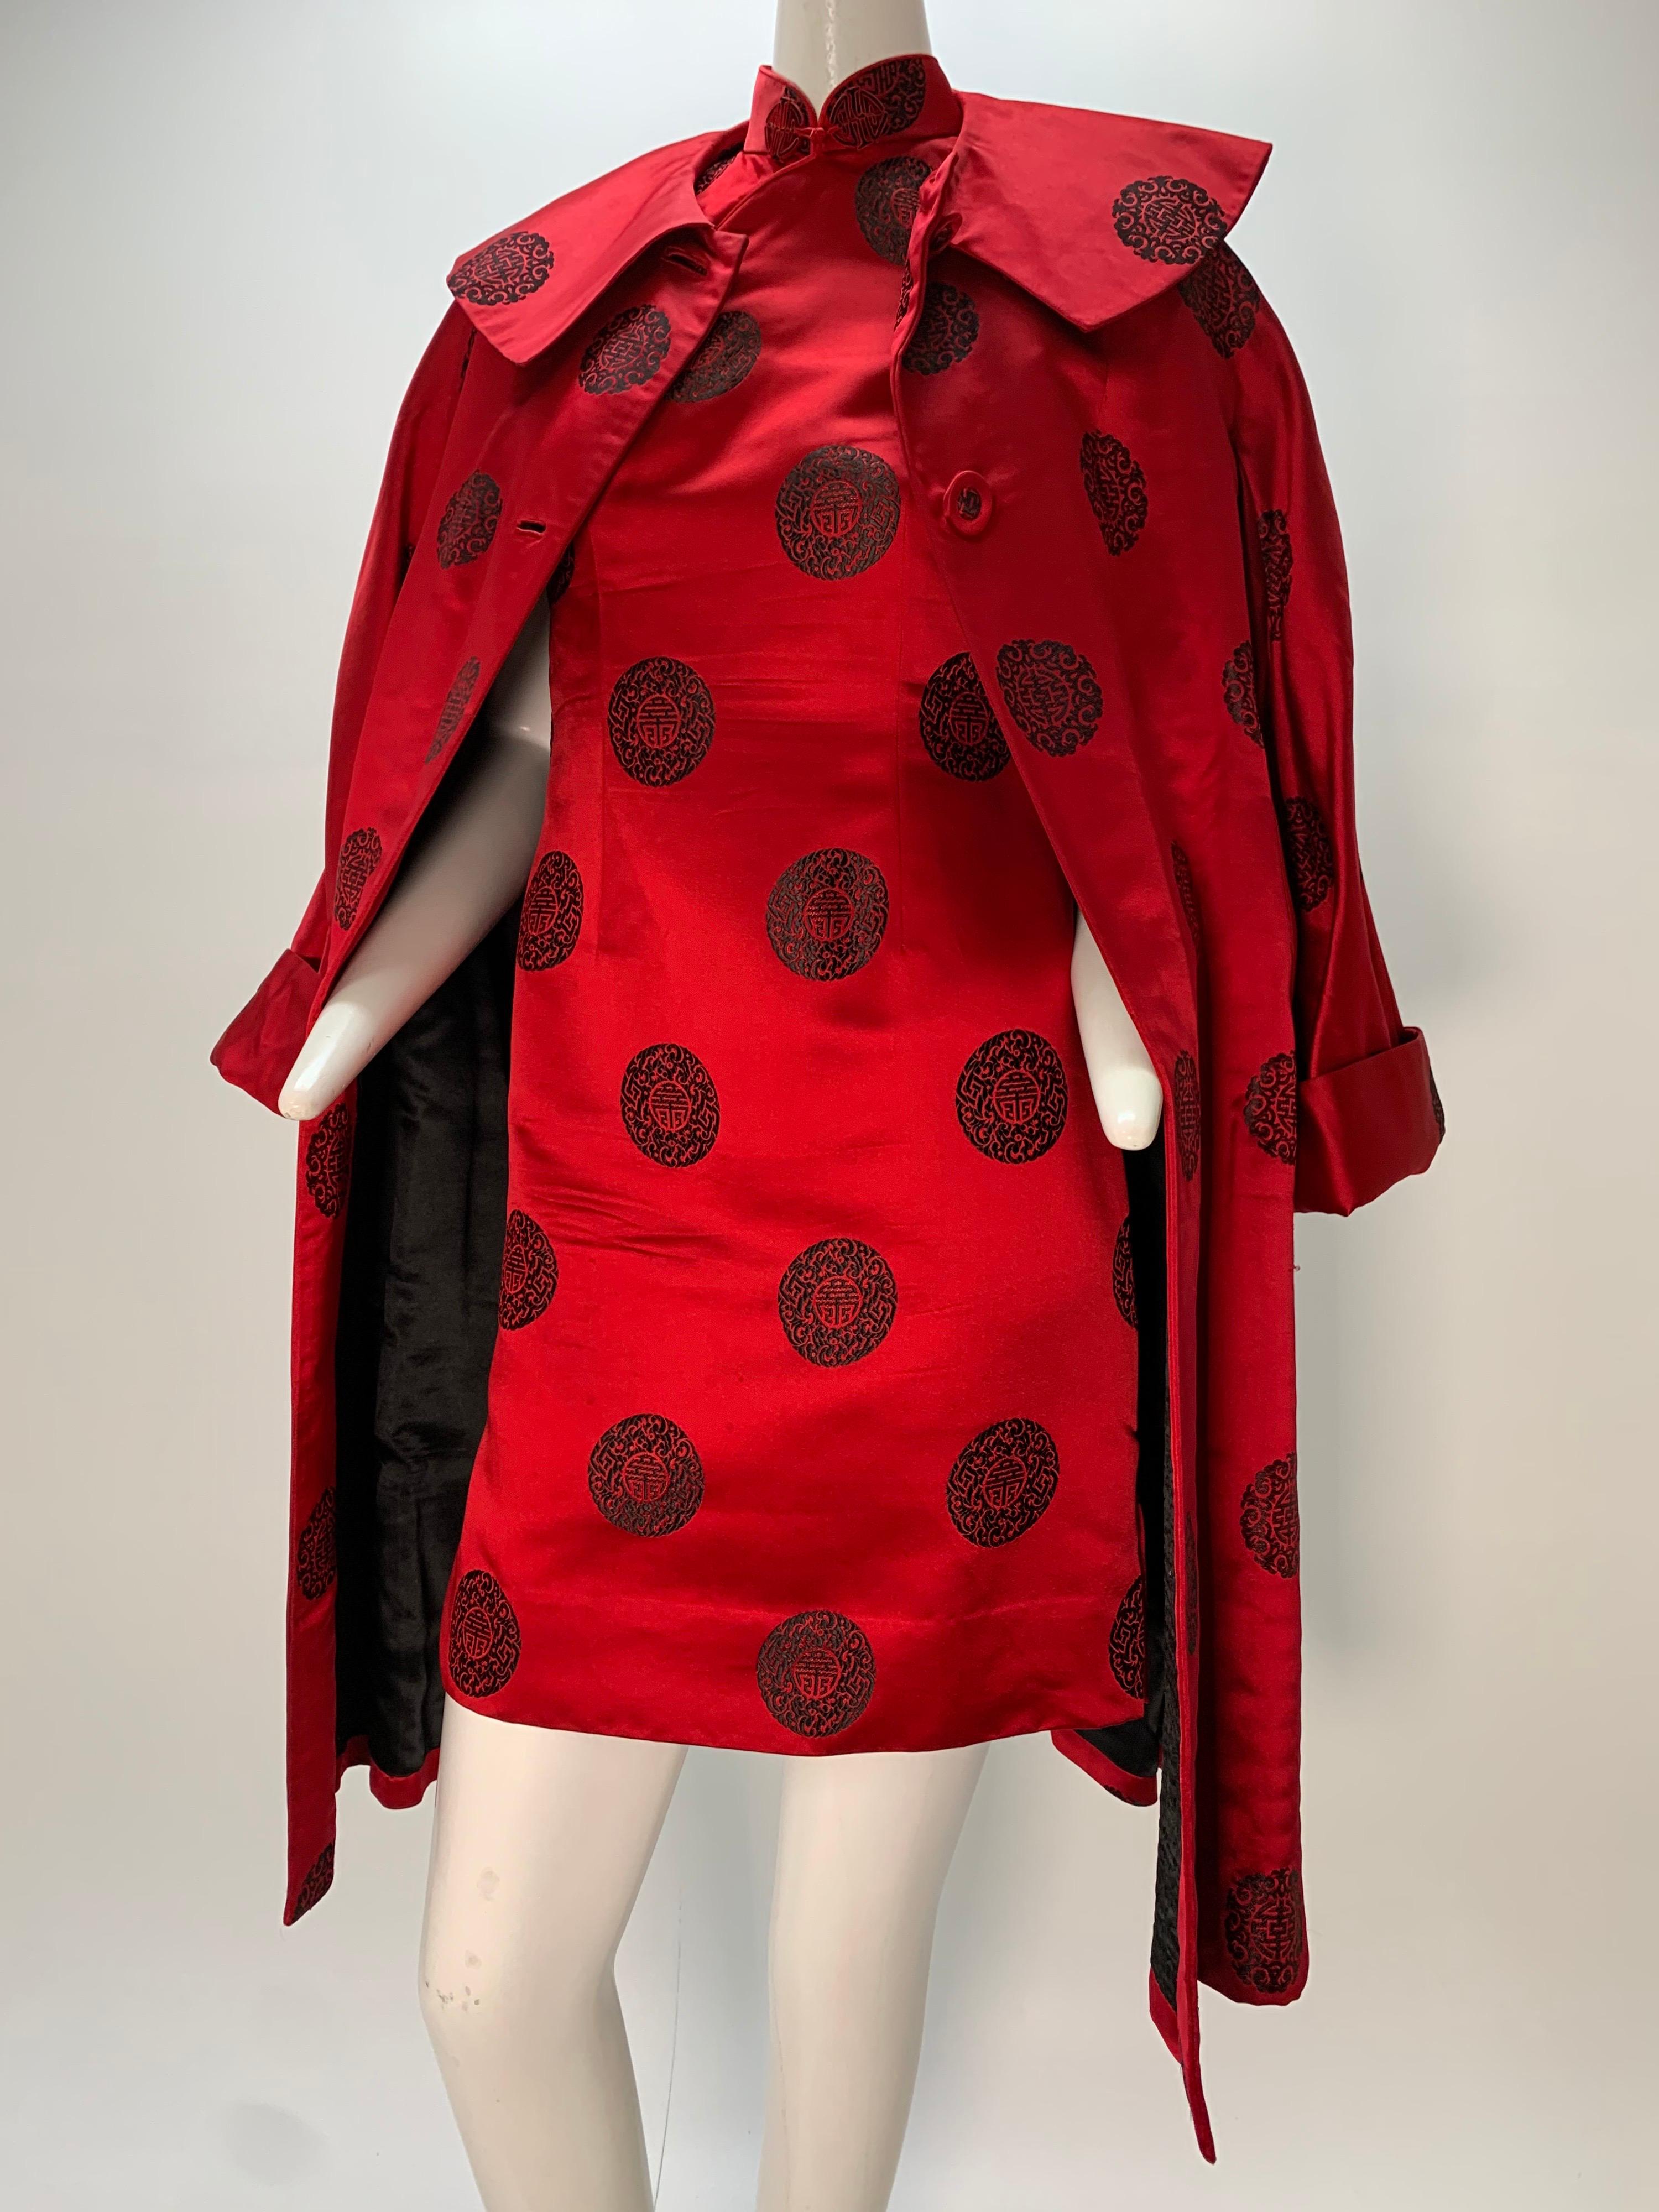 1960s scarlet and black Hong Kong heavy silk satin cheongsam mini dress and full cocktail coat ensemble. Dress is traditional cheongsam cut with short hem, and piped frog at neckline. Coat is full-cut and lined in black quilted silk with a wide